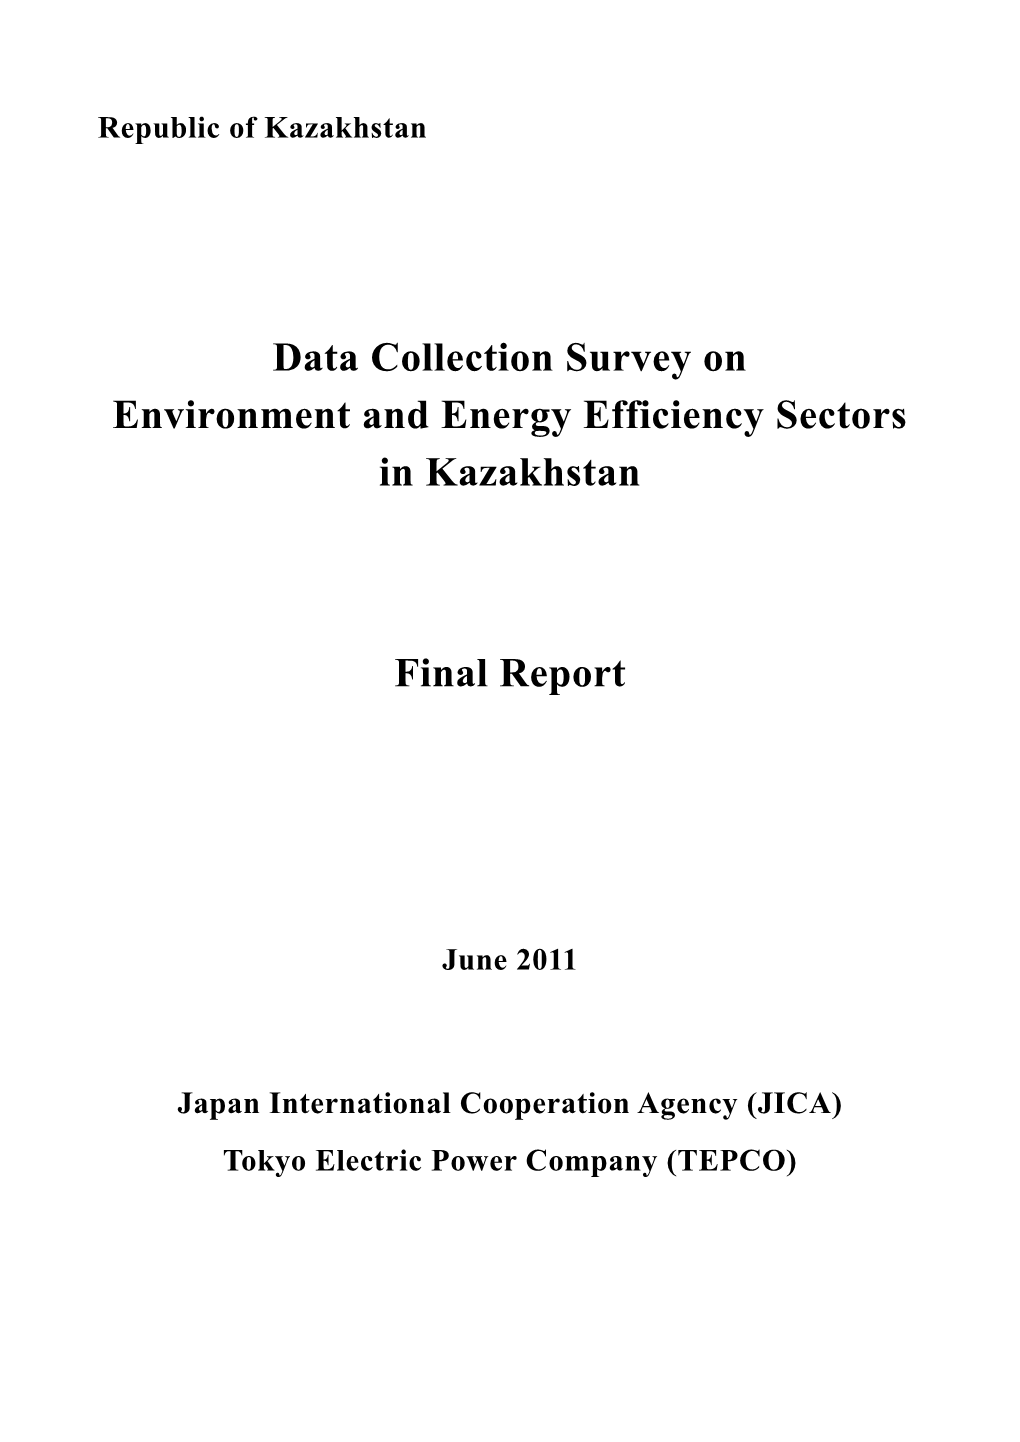 Data Collection Survey on Environment and Energy Efficiency Sectors in Kazakhstan